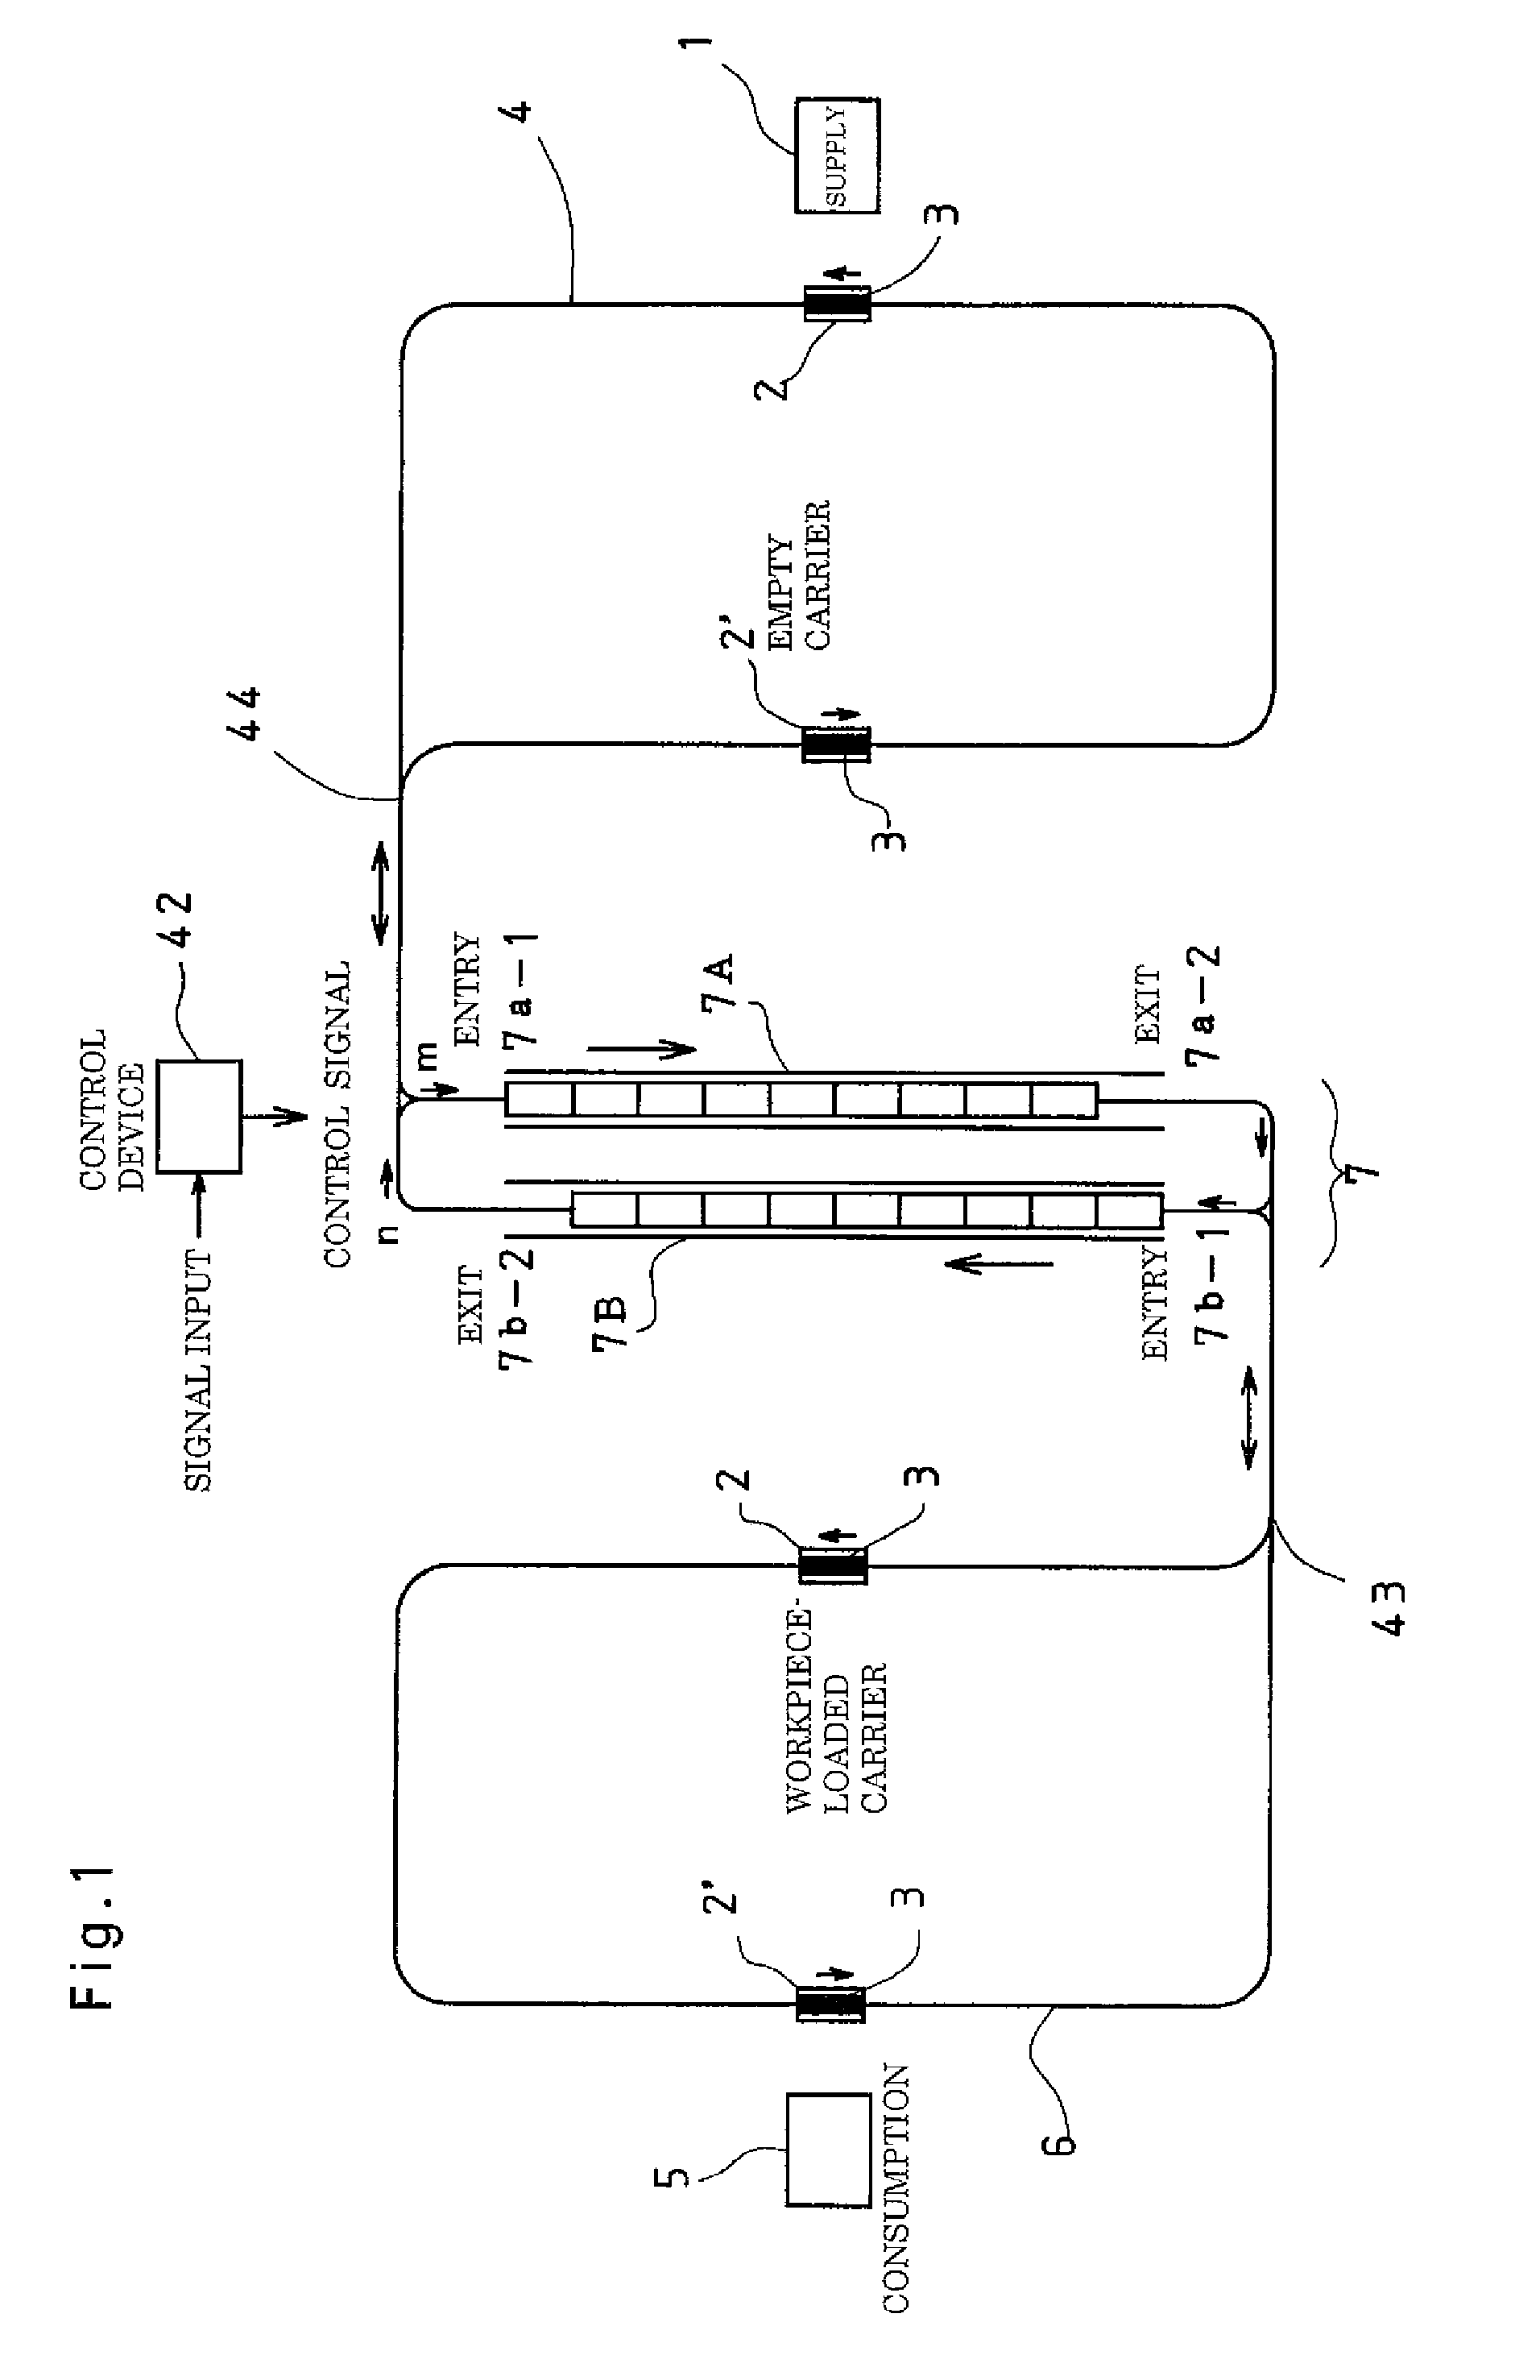 Workpiece transportation system comprising automated transport vehicles and workpiece carriers